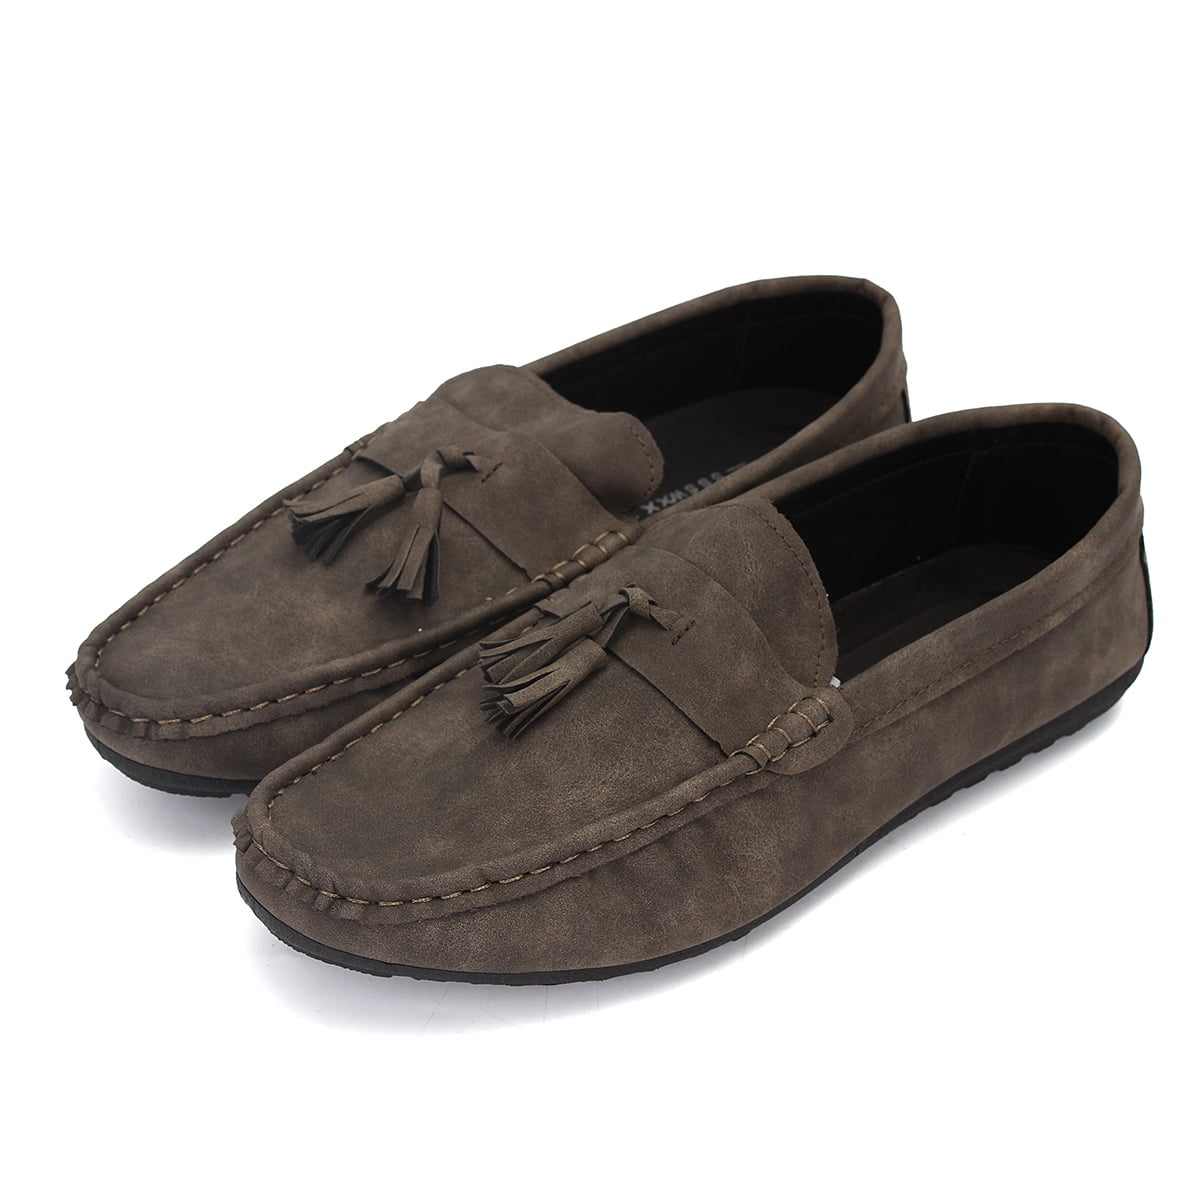 Mens Stylish Gommino Moccasins Suede Comfort Casual Driving pull on Loafer Shoes 